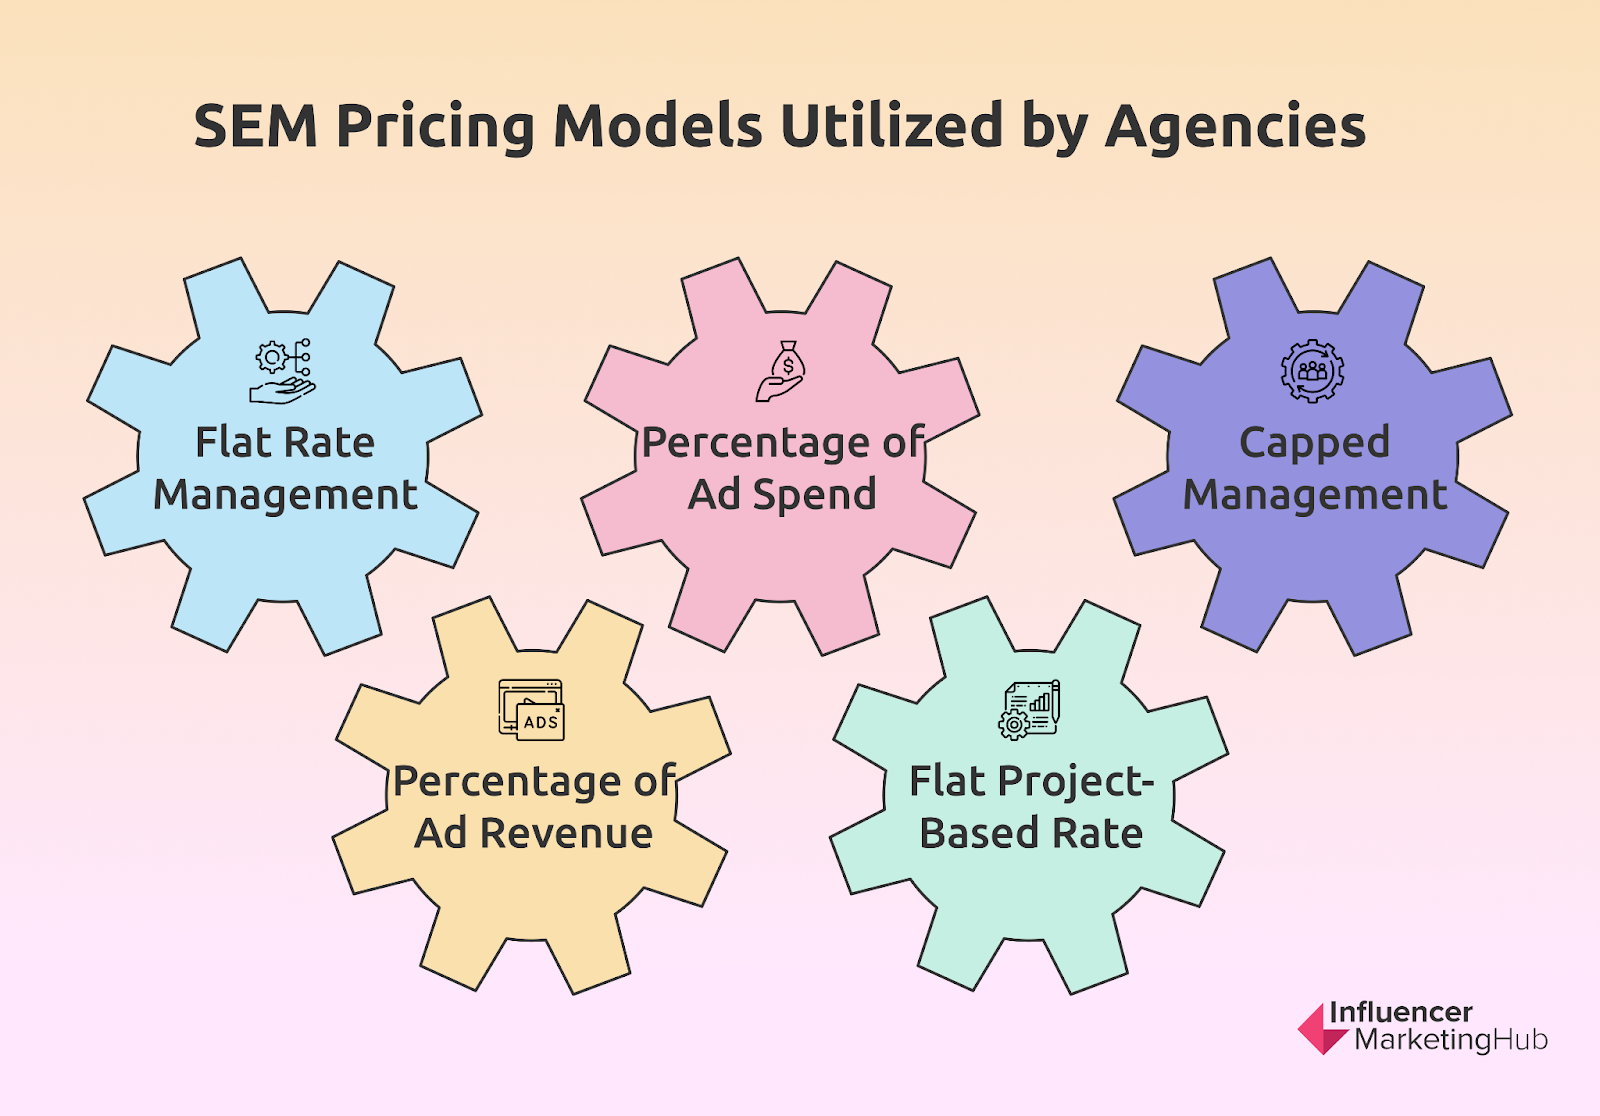 Agency Pricing Models Used with SEM